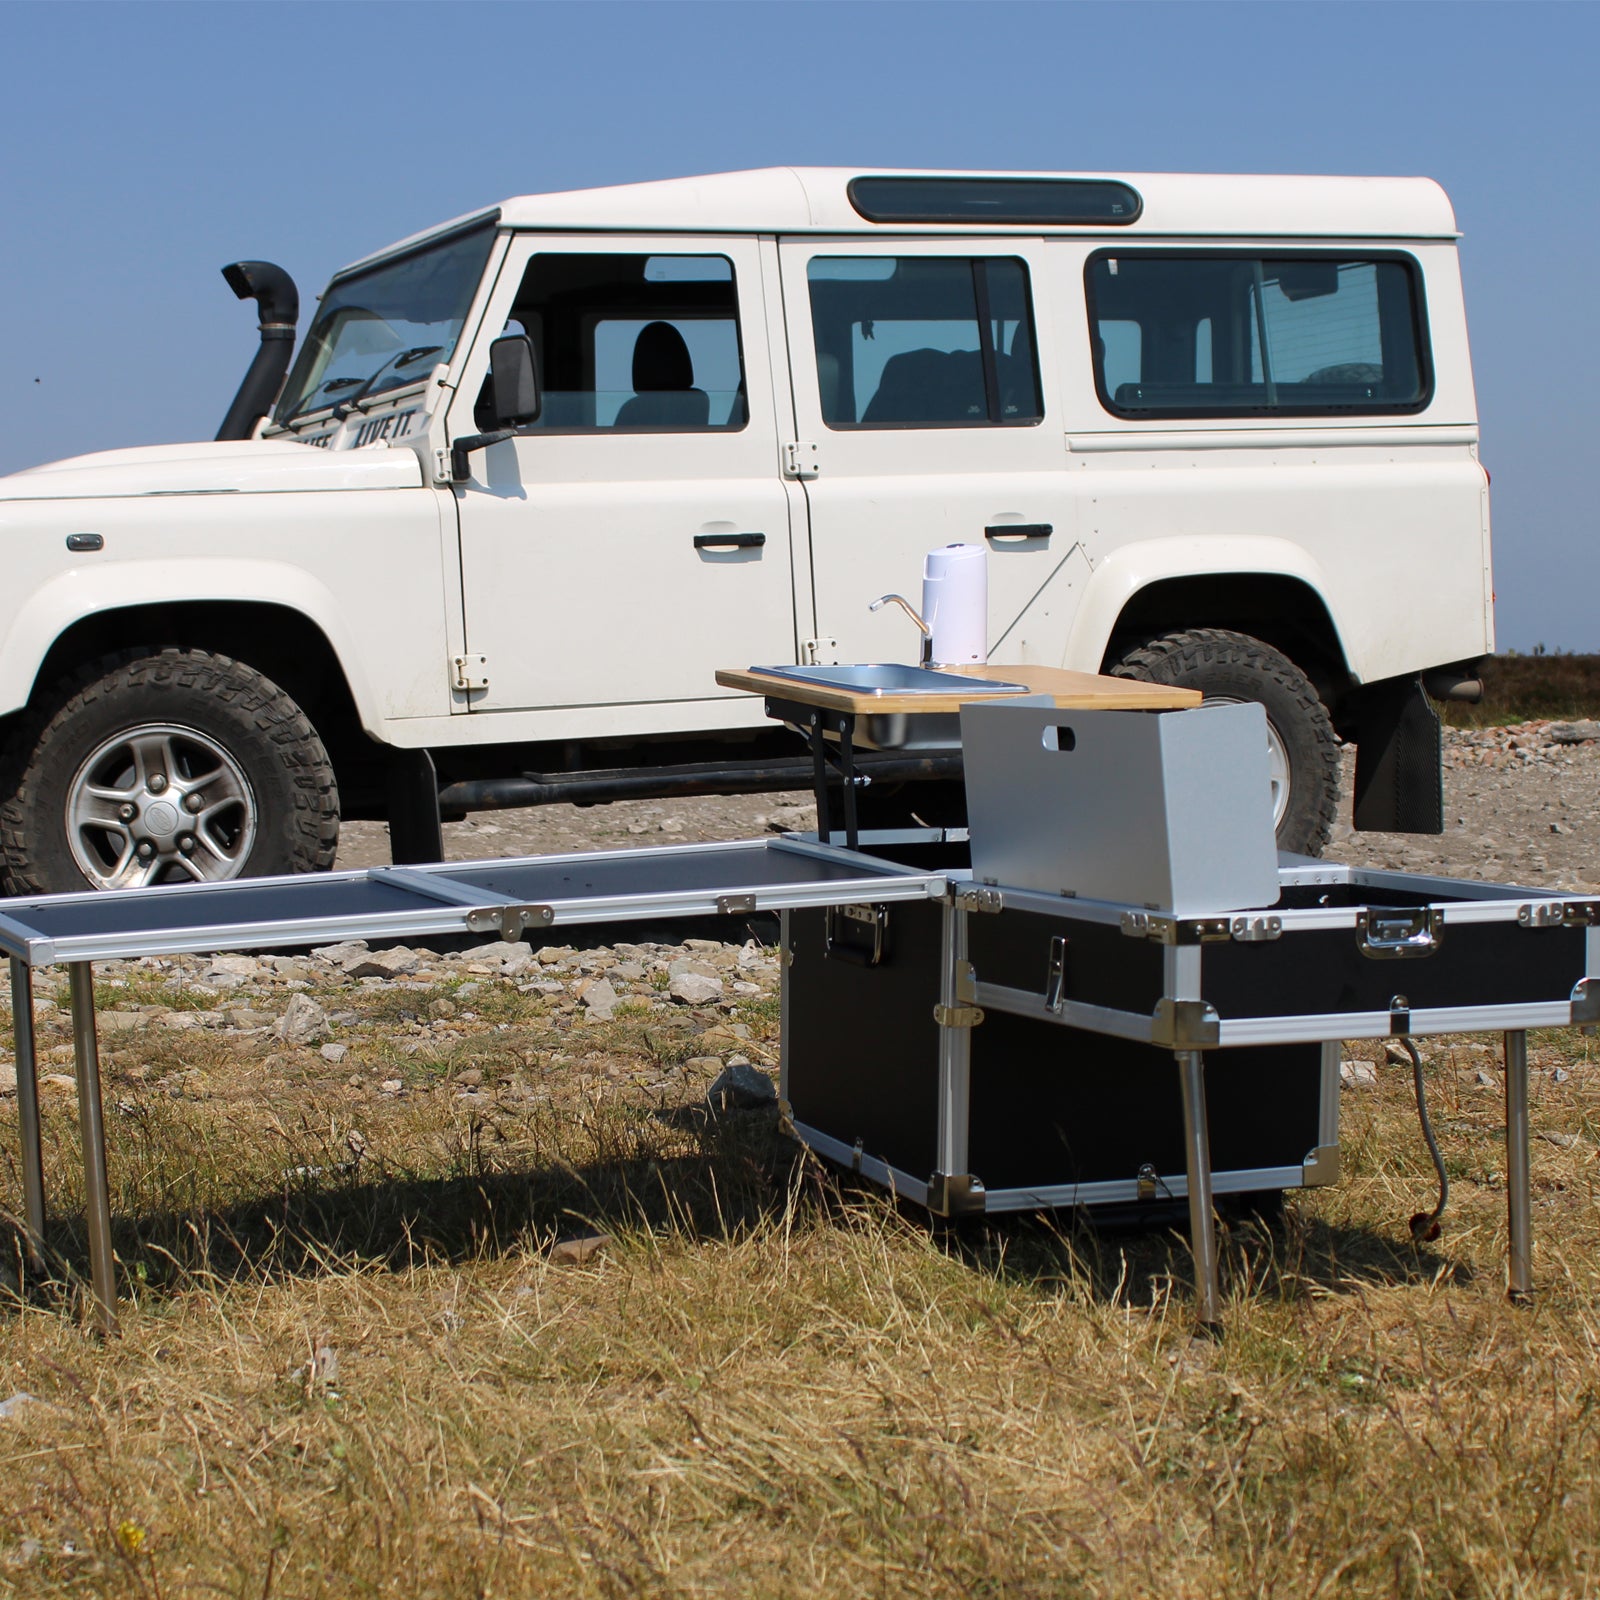 Compact portable kitchen with a Land Rover in the background.